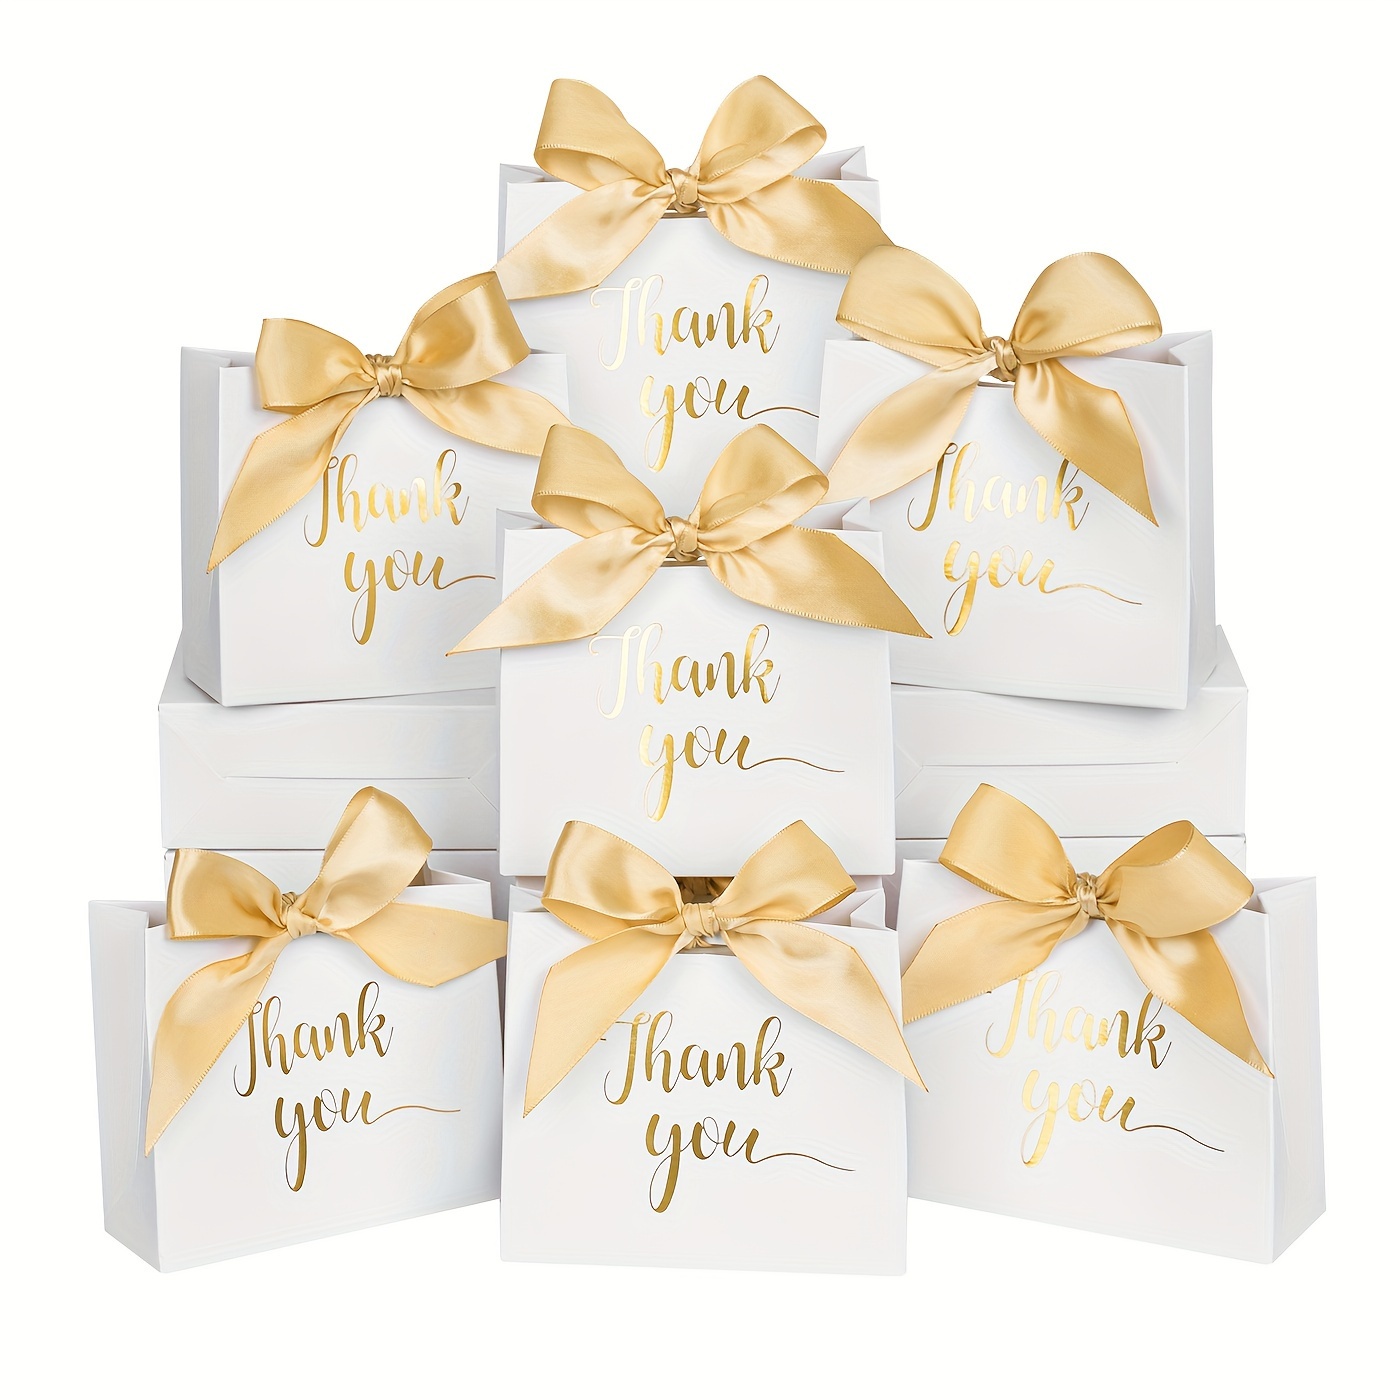 

50 Packs, Small Thank You Gift Bags, 4.5*3.9*1.8inch Mini Candy Bags With Golden Bow Ribbon, Perfect For Baby Shower, Birthday, Wedding, And Bridesmaid Celebration (white)